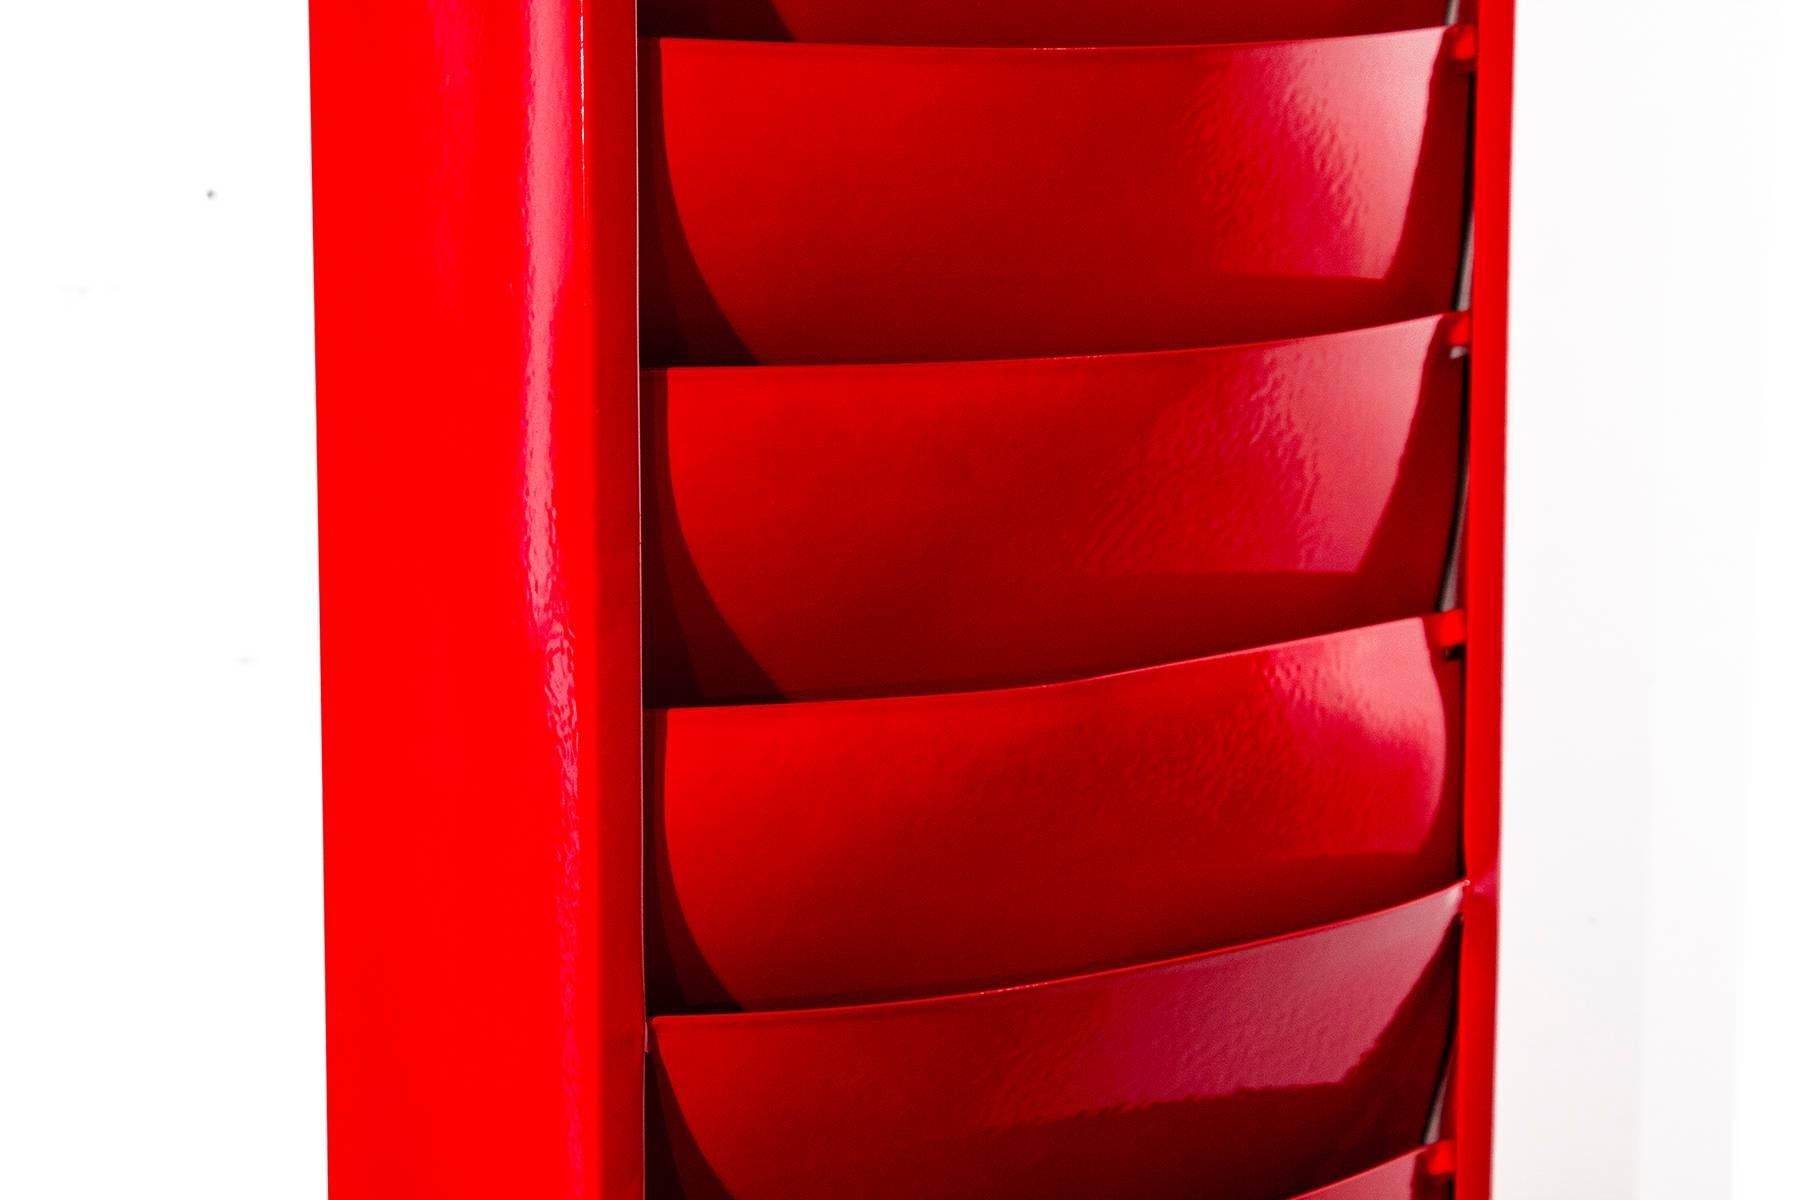 Rare 30 slot vertical file holder refinished in gloss red power coat. Wall mountable. Unique home of office organizing piece.

Dimensions: 4